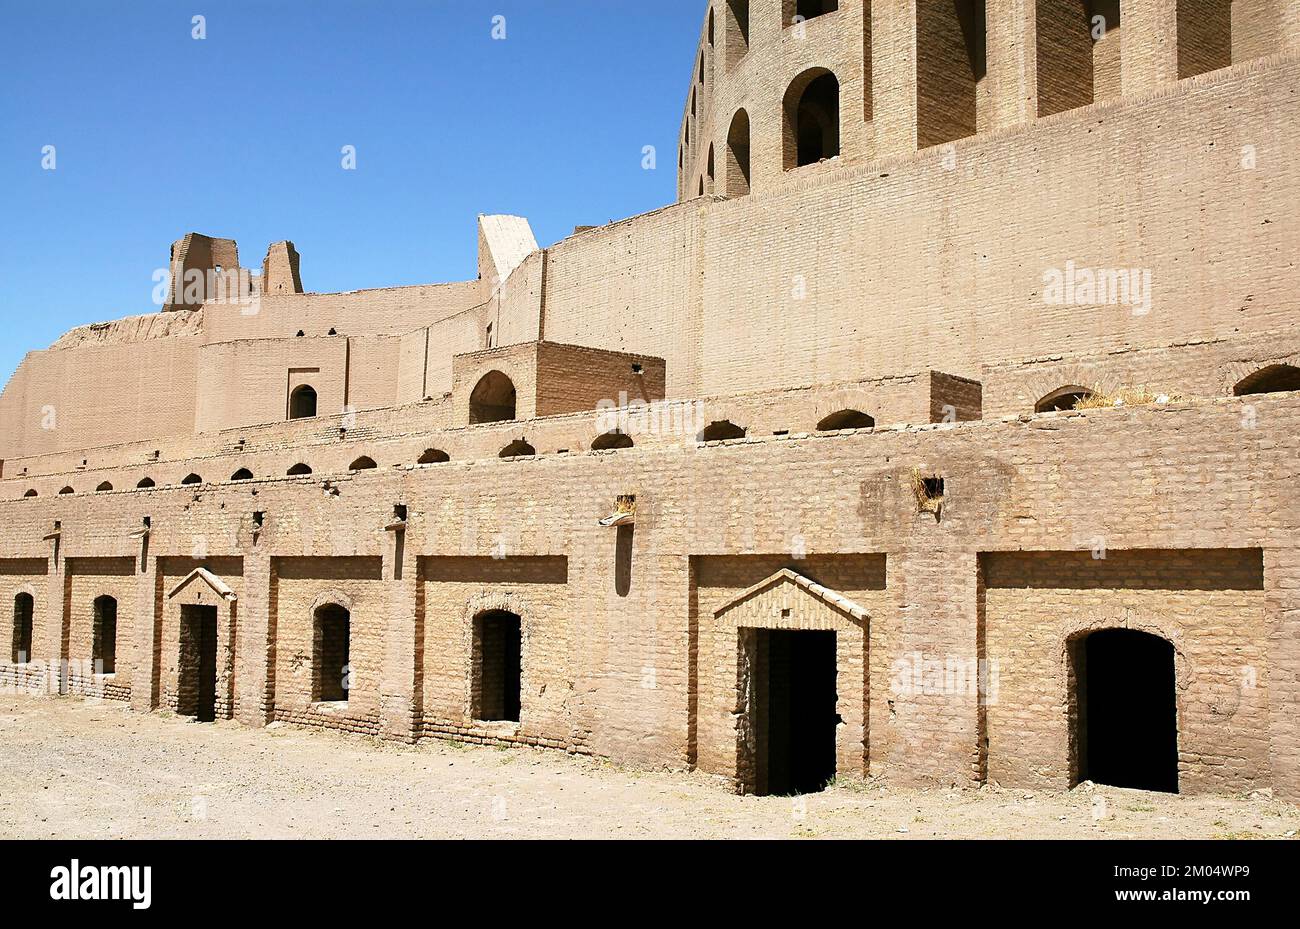 Herat Citadel in Herat, Afghanistan. The fort dates back to the 15th century. The castle was restored in the 1970s and a renovation completed in 2011. Stock Photo